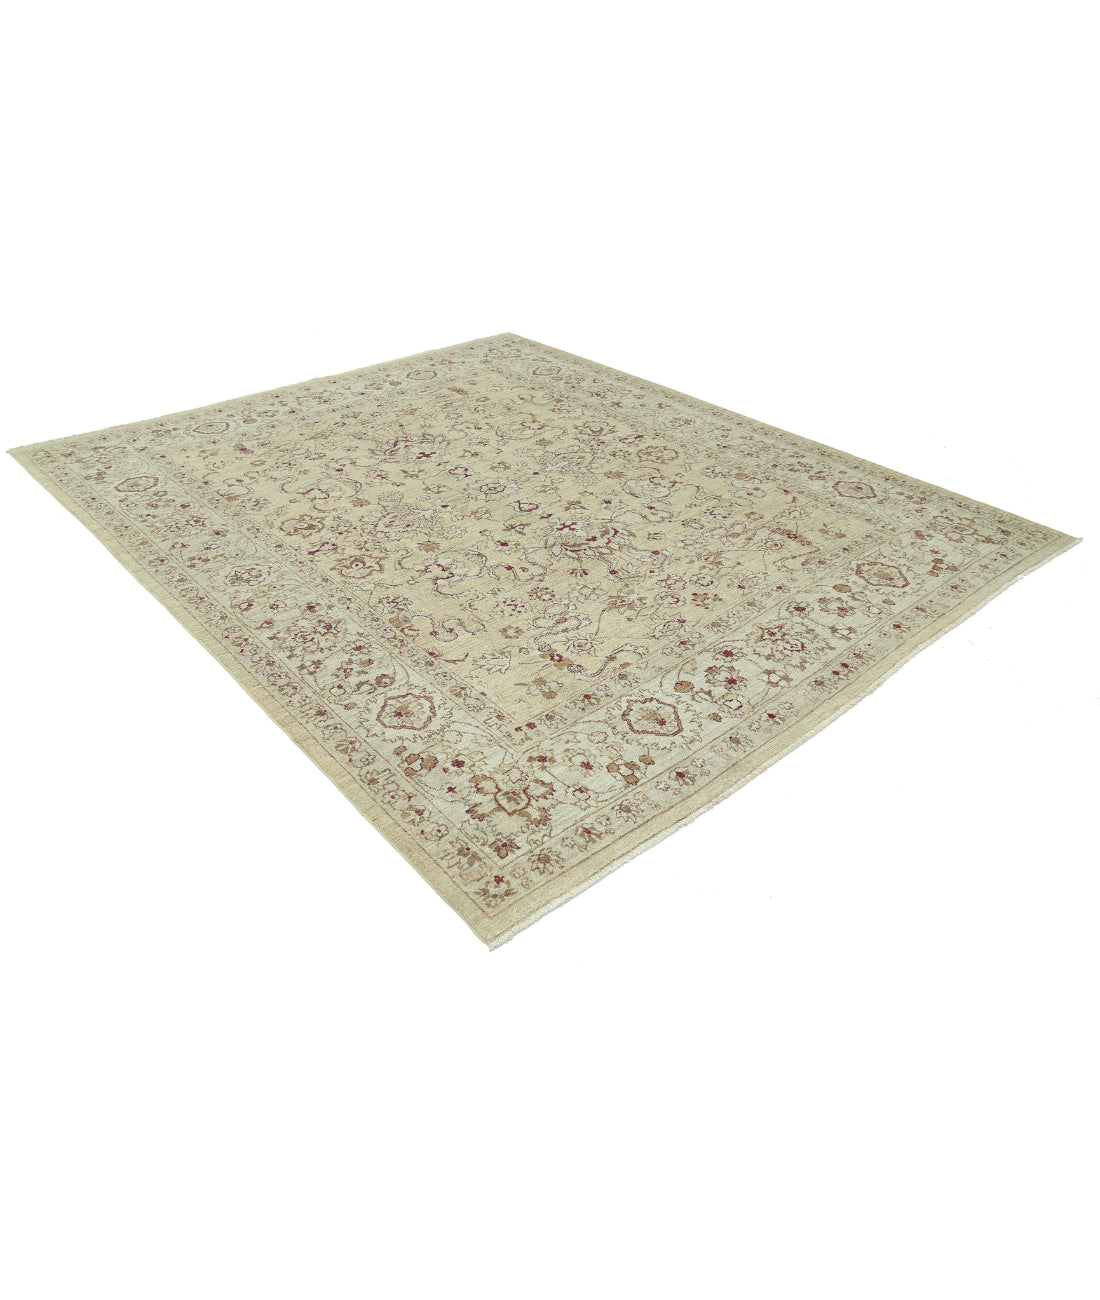 Hand Knotted Serenity Wool Rug - 7'10'' x 9'4'' 7'10'' x 9'4'' (235 X 280) / Beige / Ivory